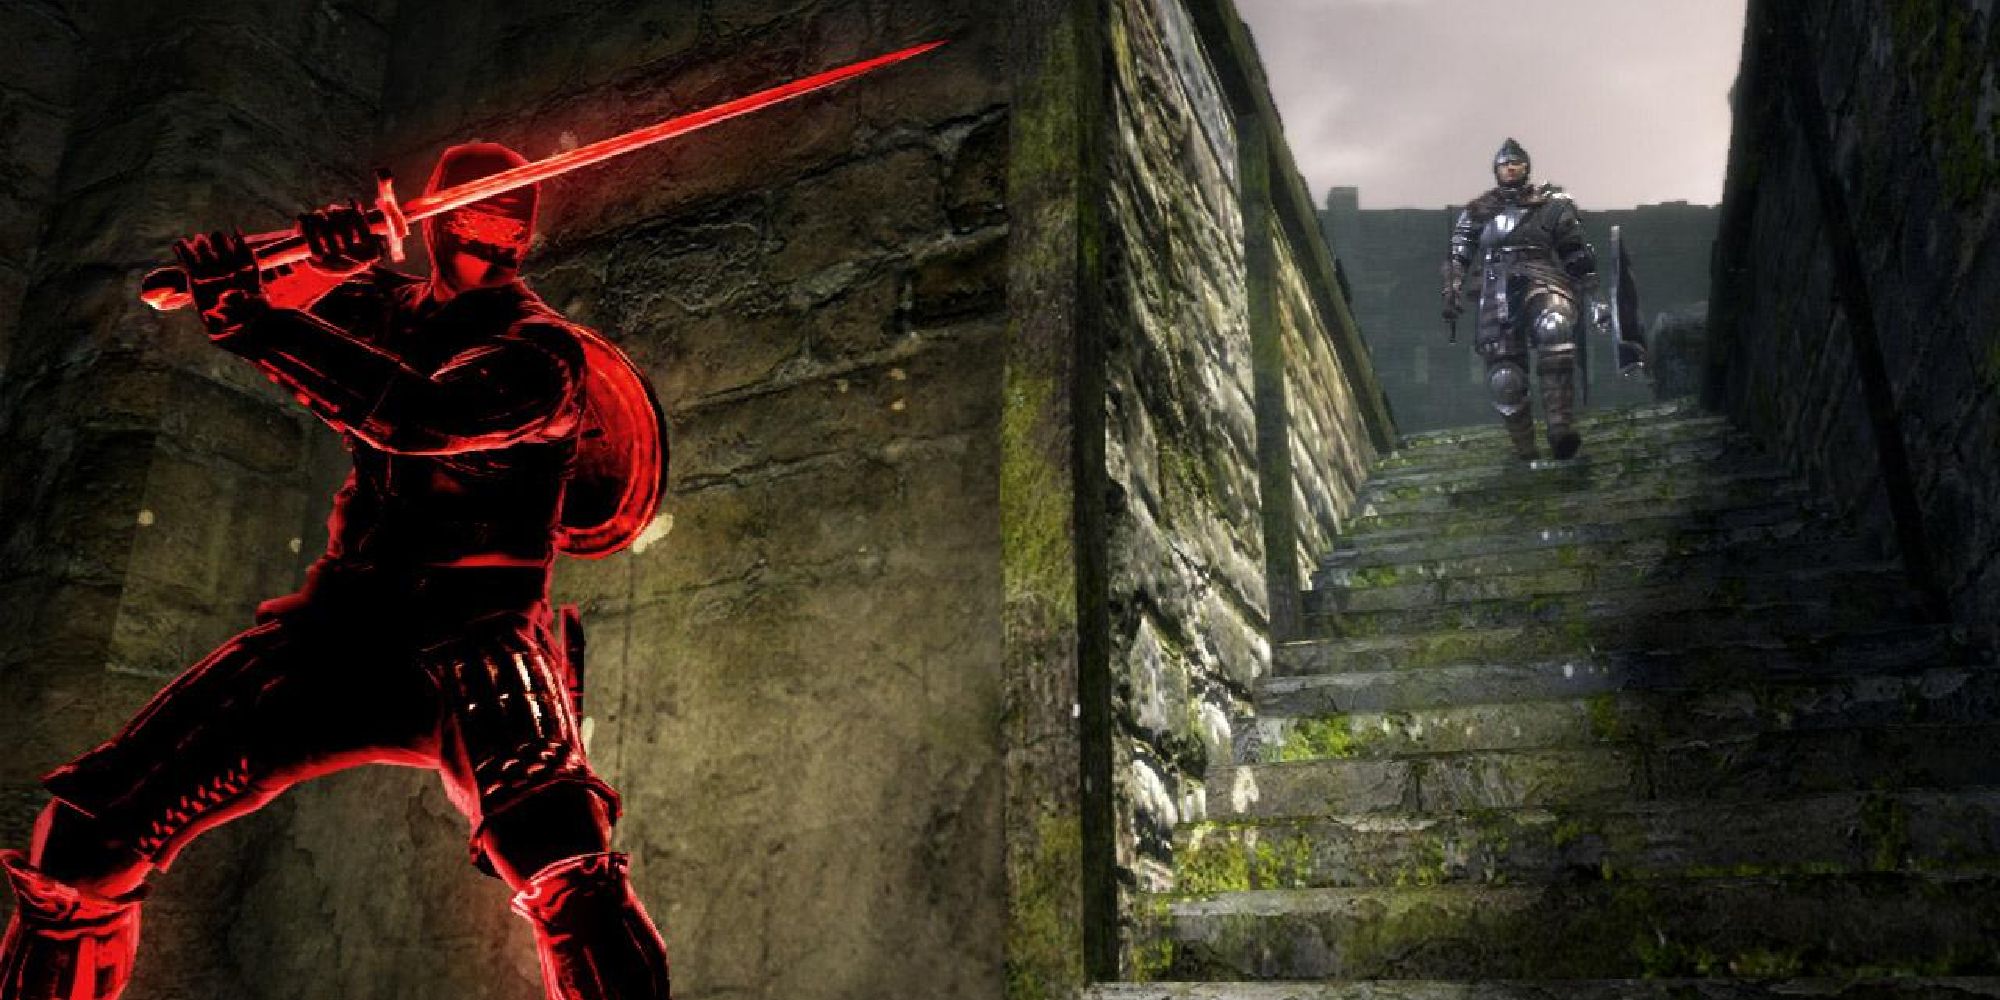 Dark Souls 1 red phantom invader hiding behind a corner while the host walks down the stairs